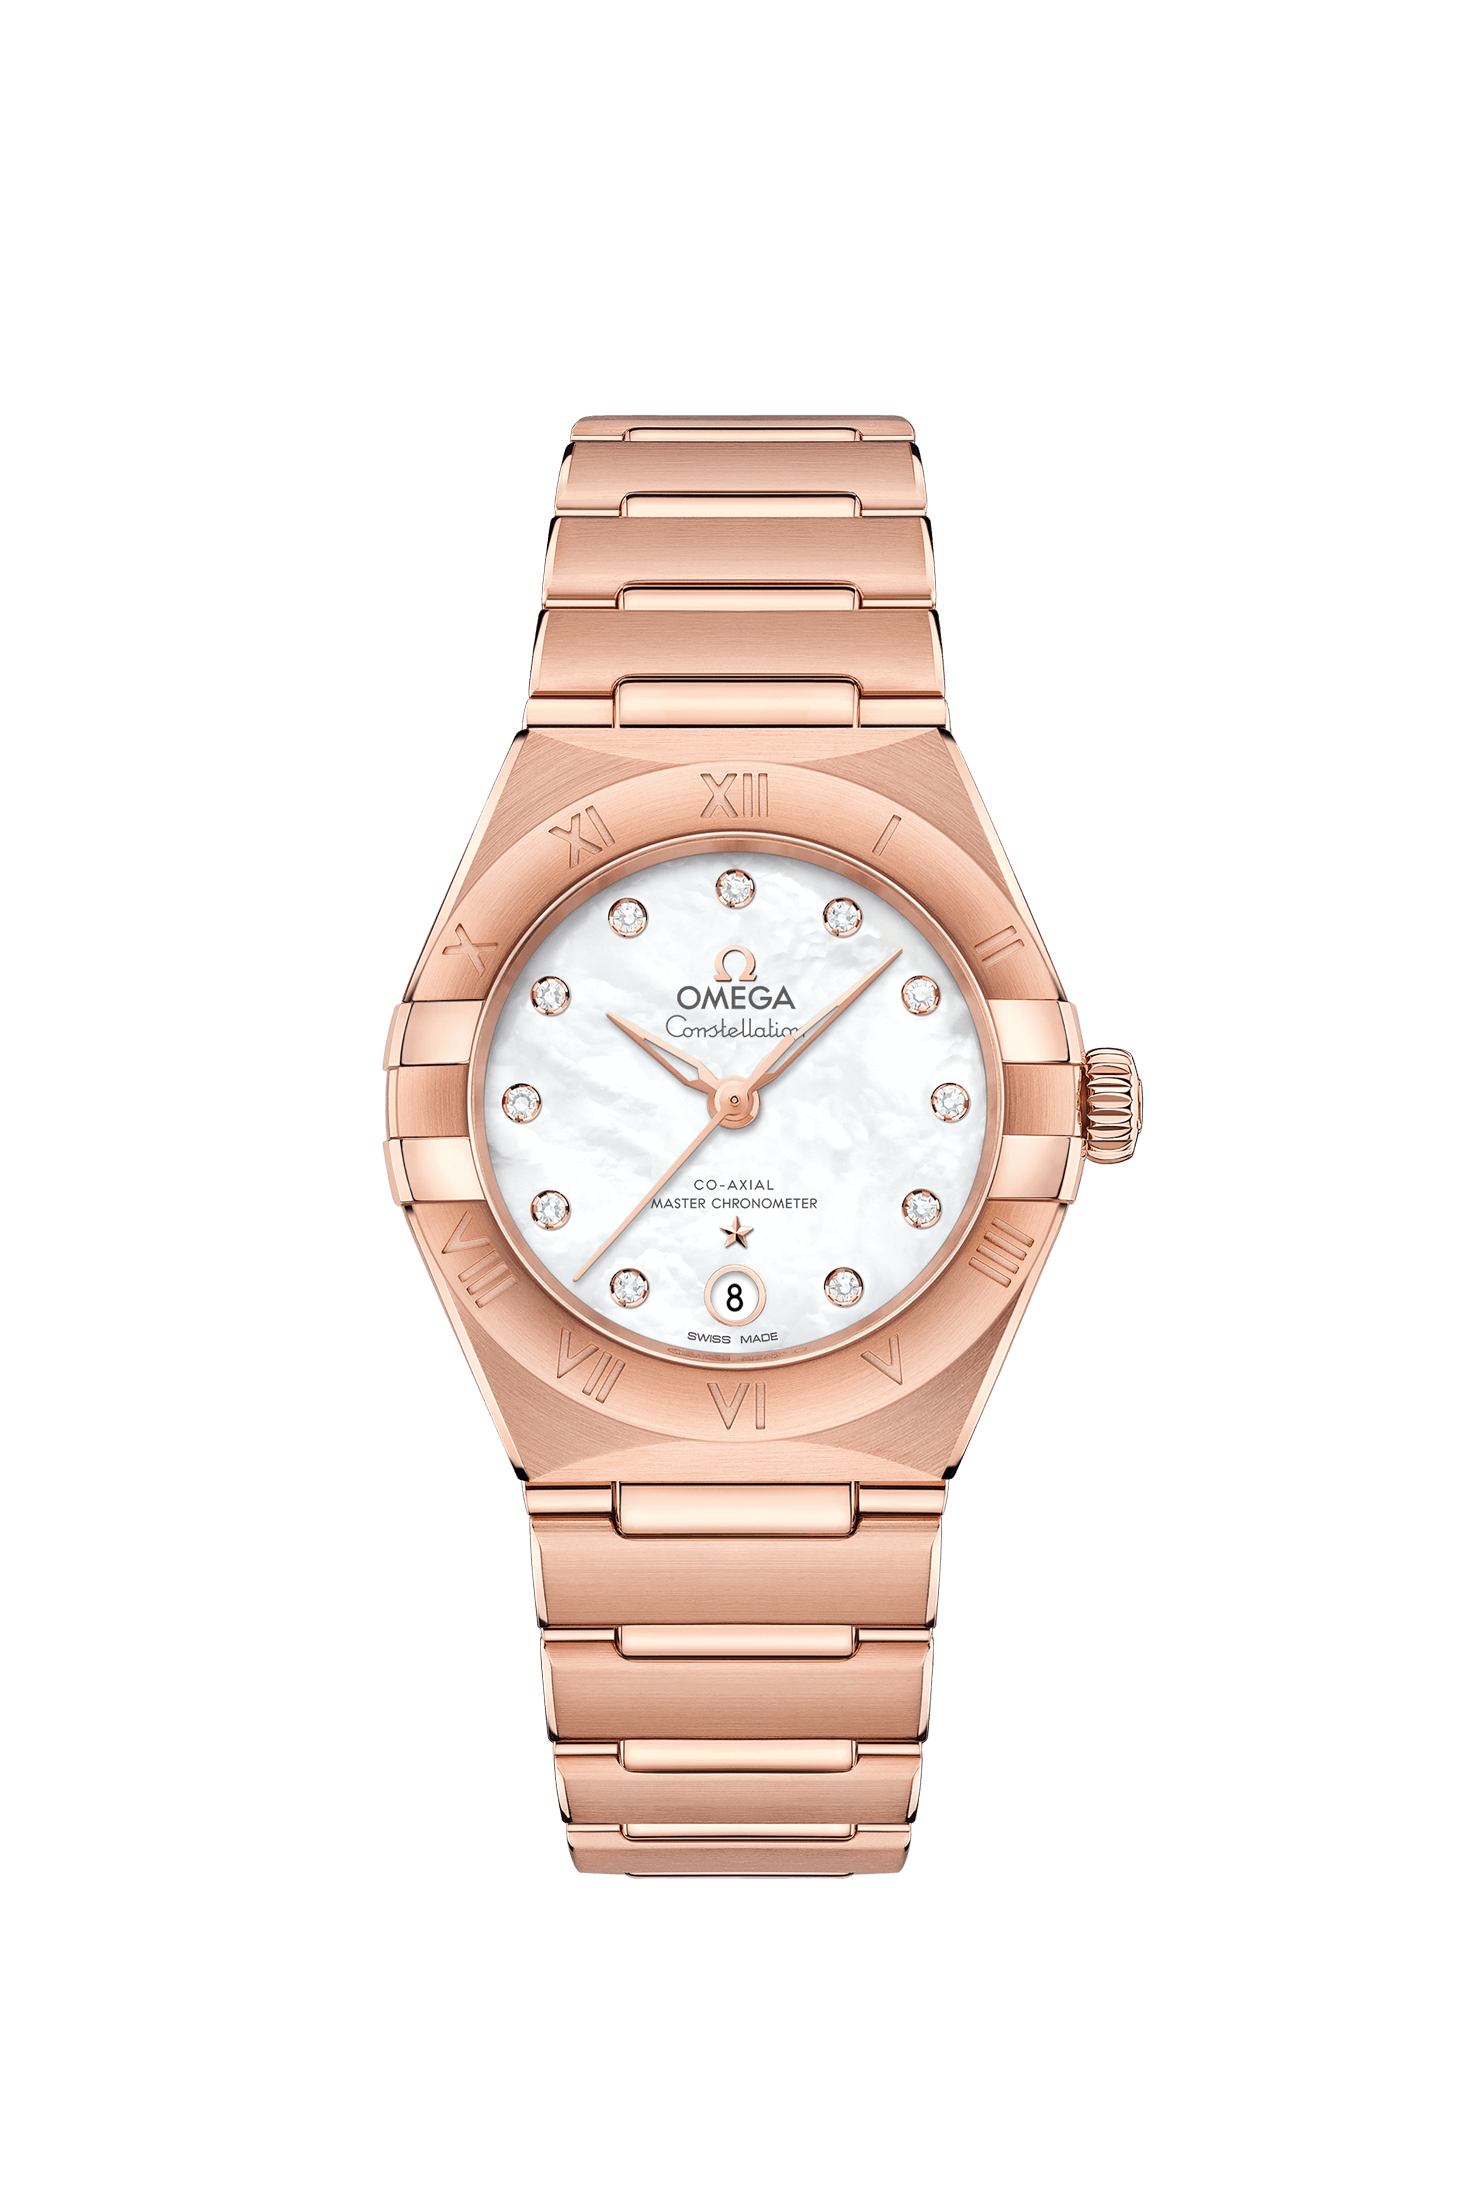 Ladies' watch  OMEGA, Constellation Co Axial Master Chronometer / 29mm, SKU: 131.50.29.20.55.001 | watchapproach.com